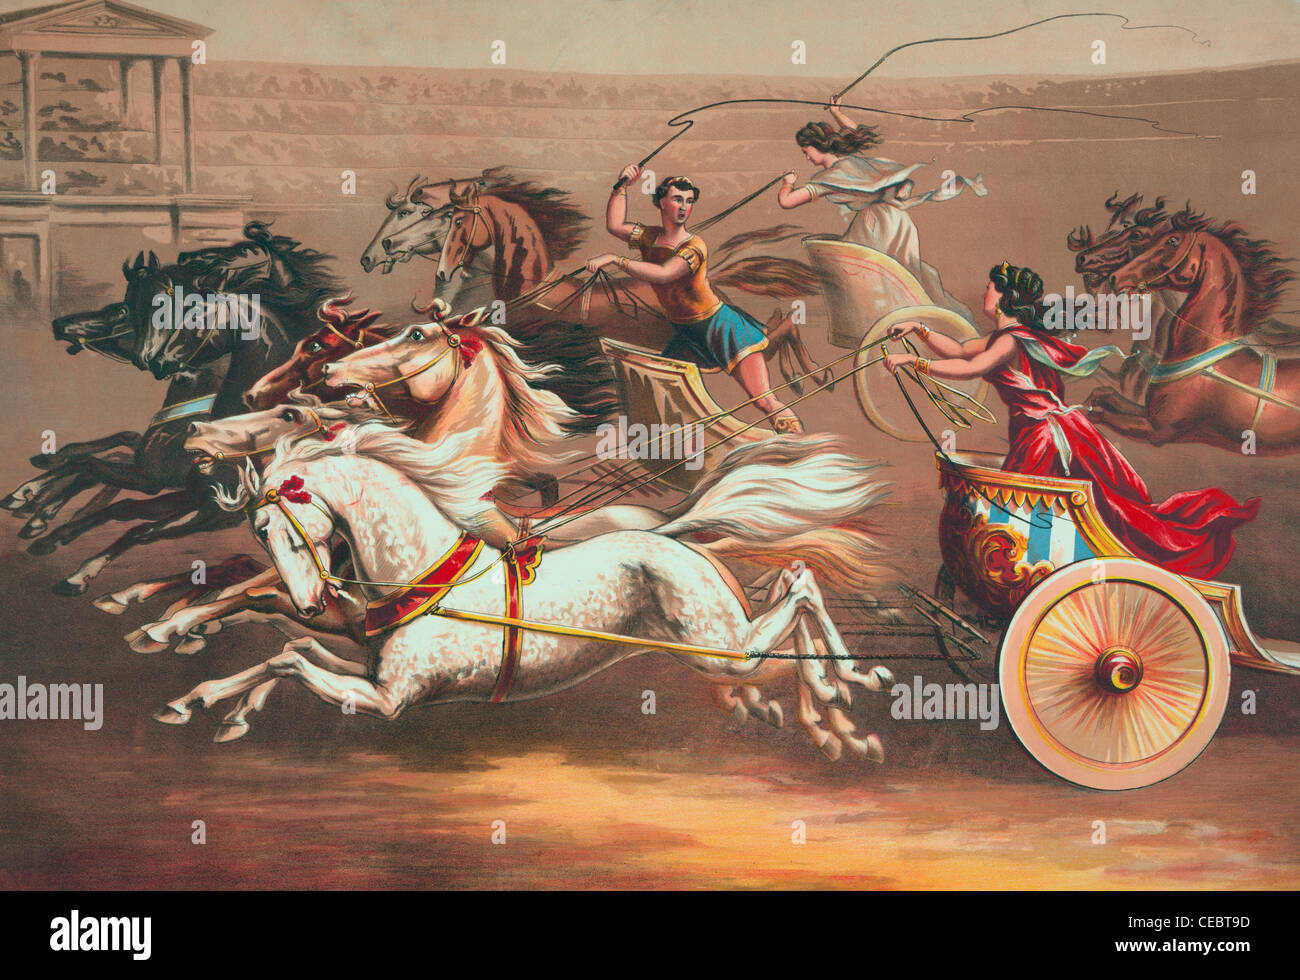 Four horse chariot race Stock Photo